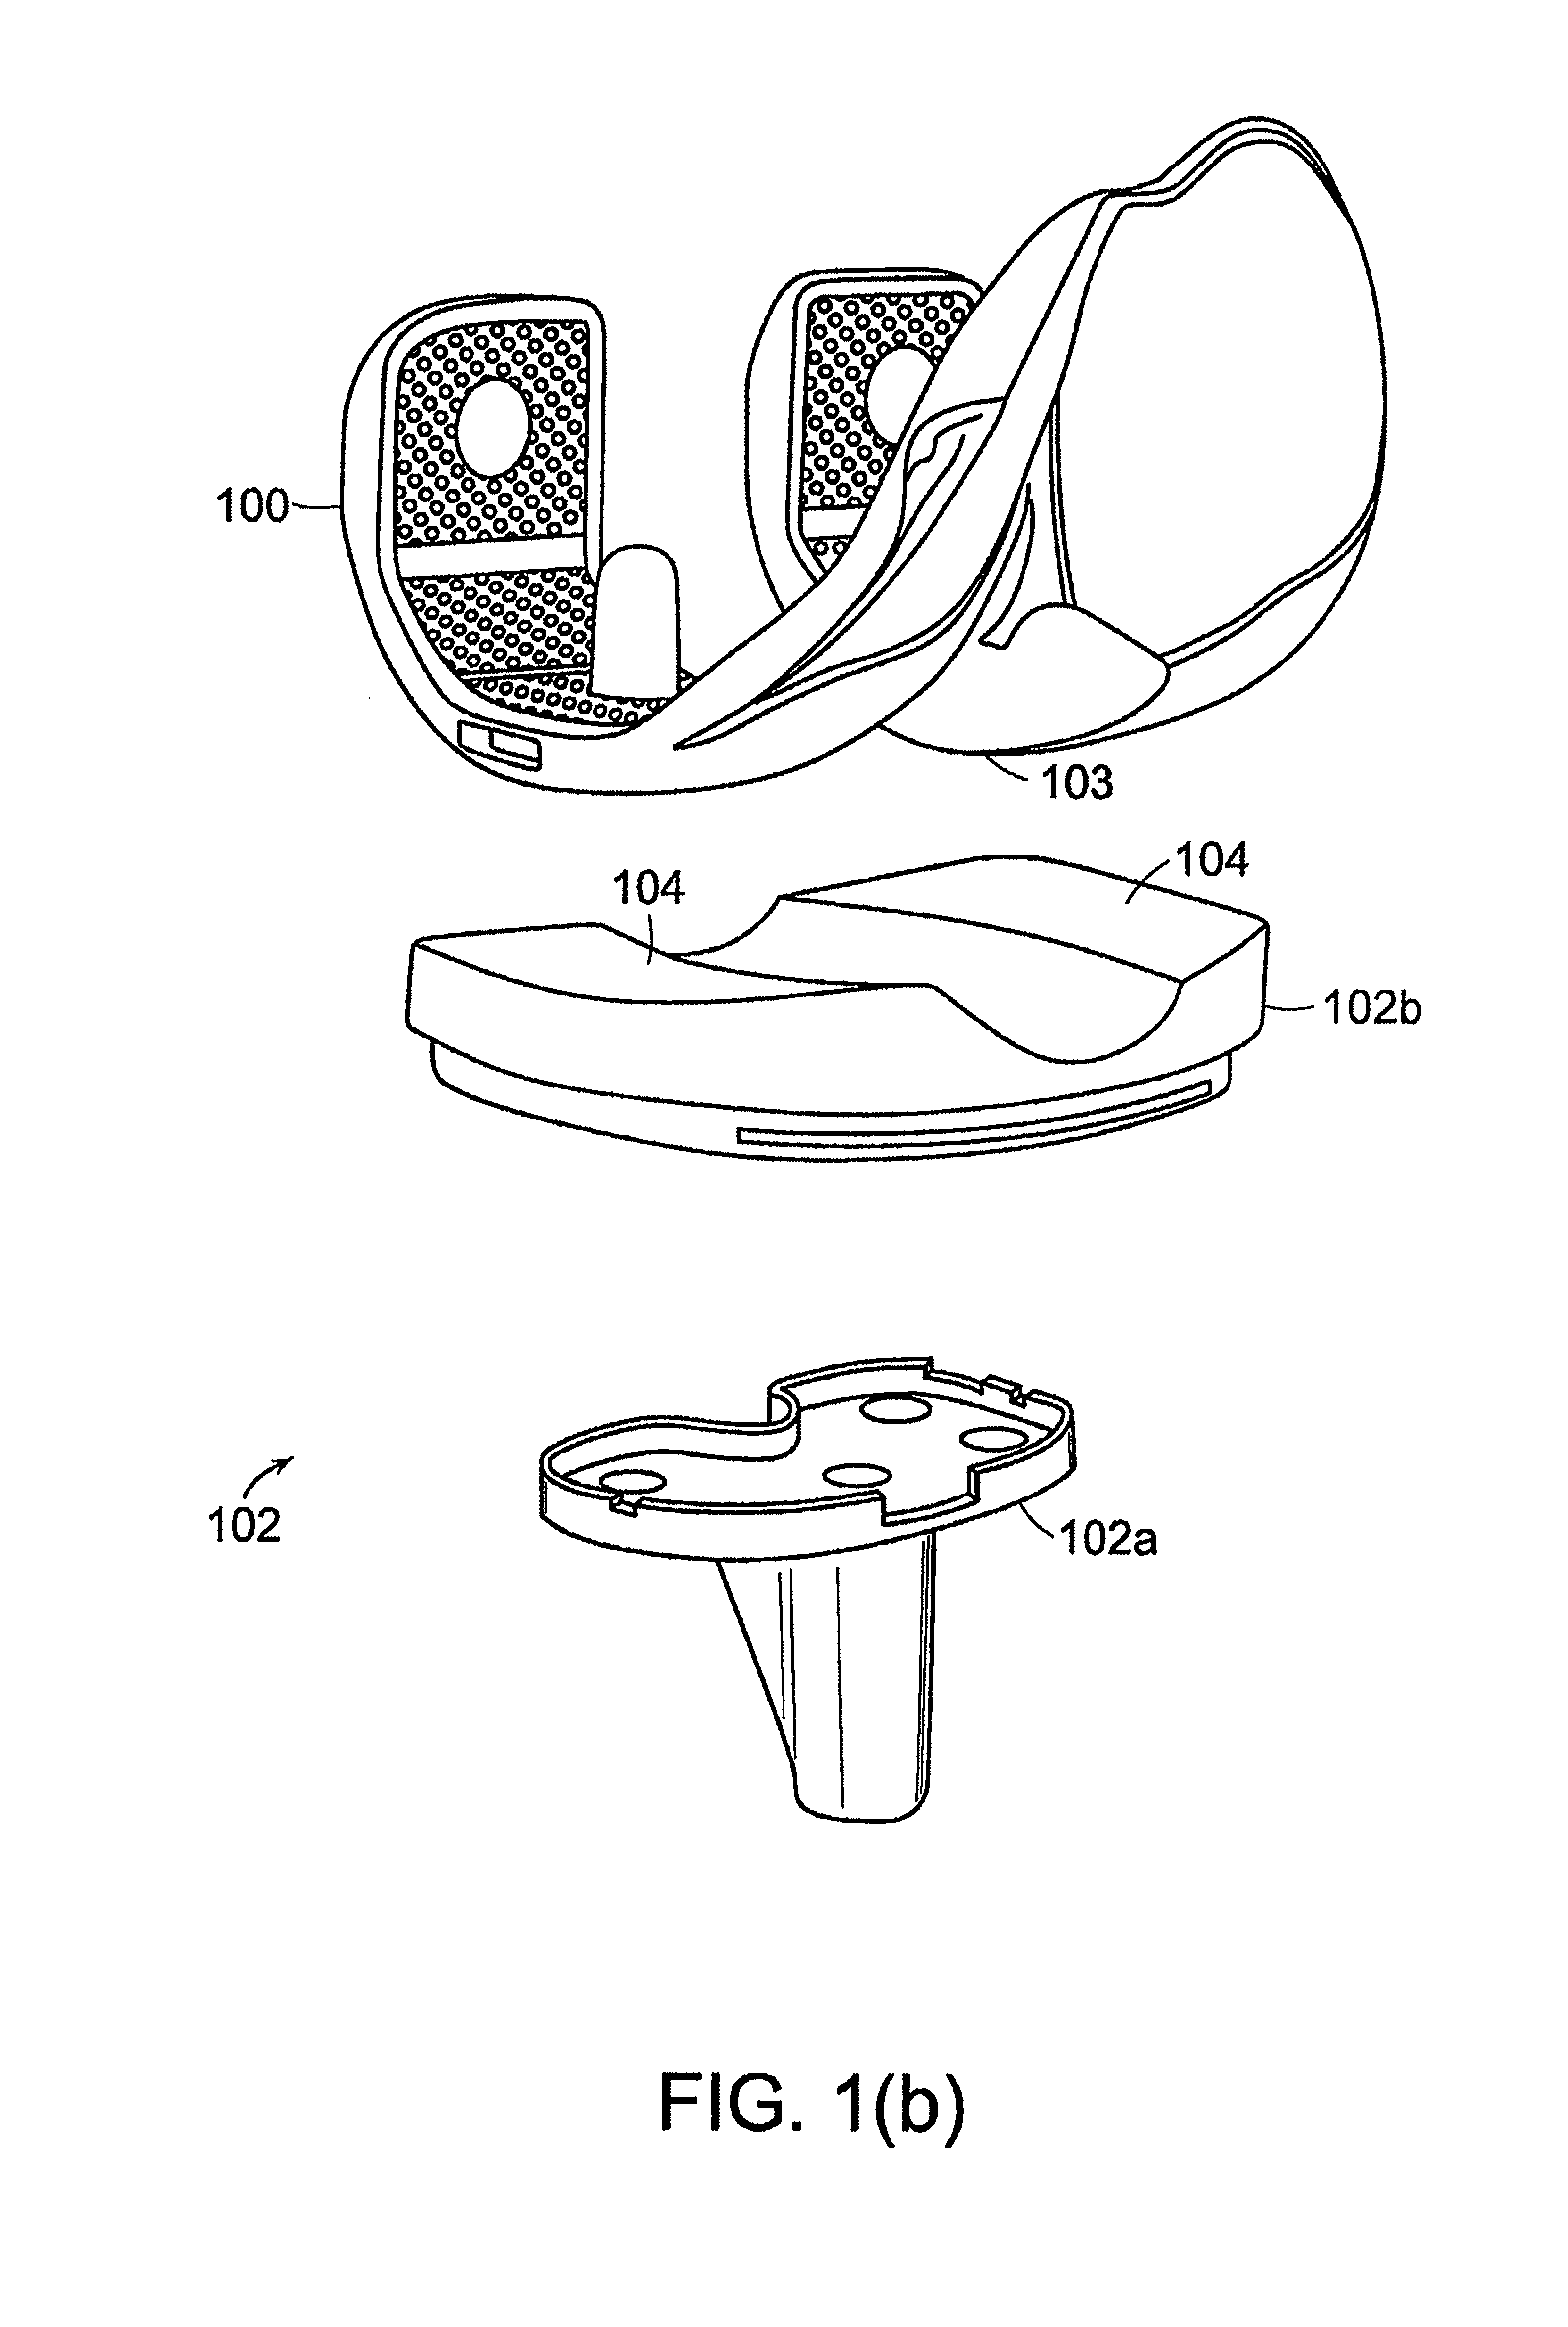 Implant Planning Using Captured Joint Motion Information